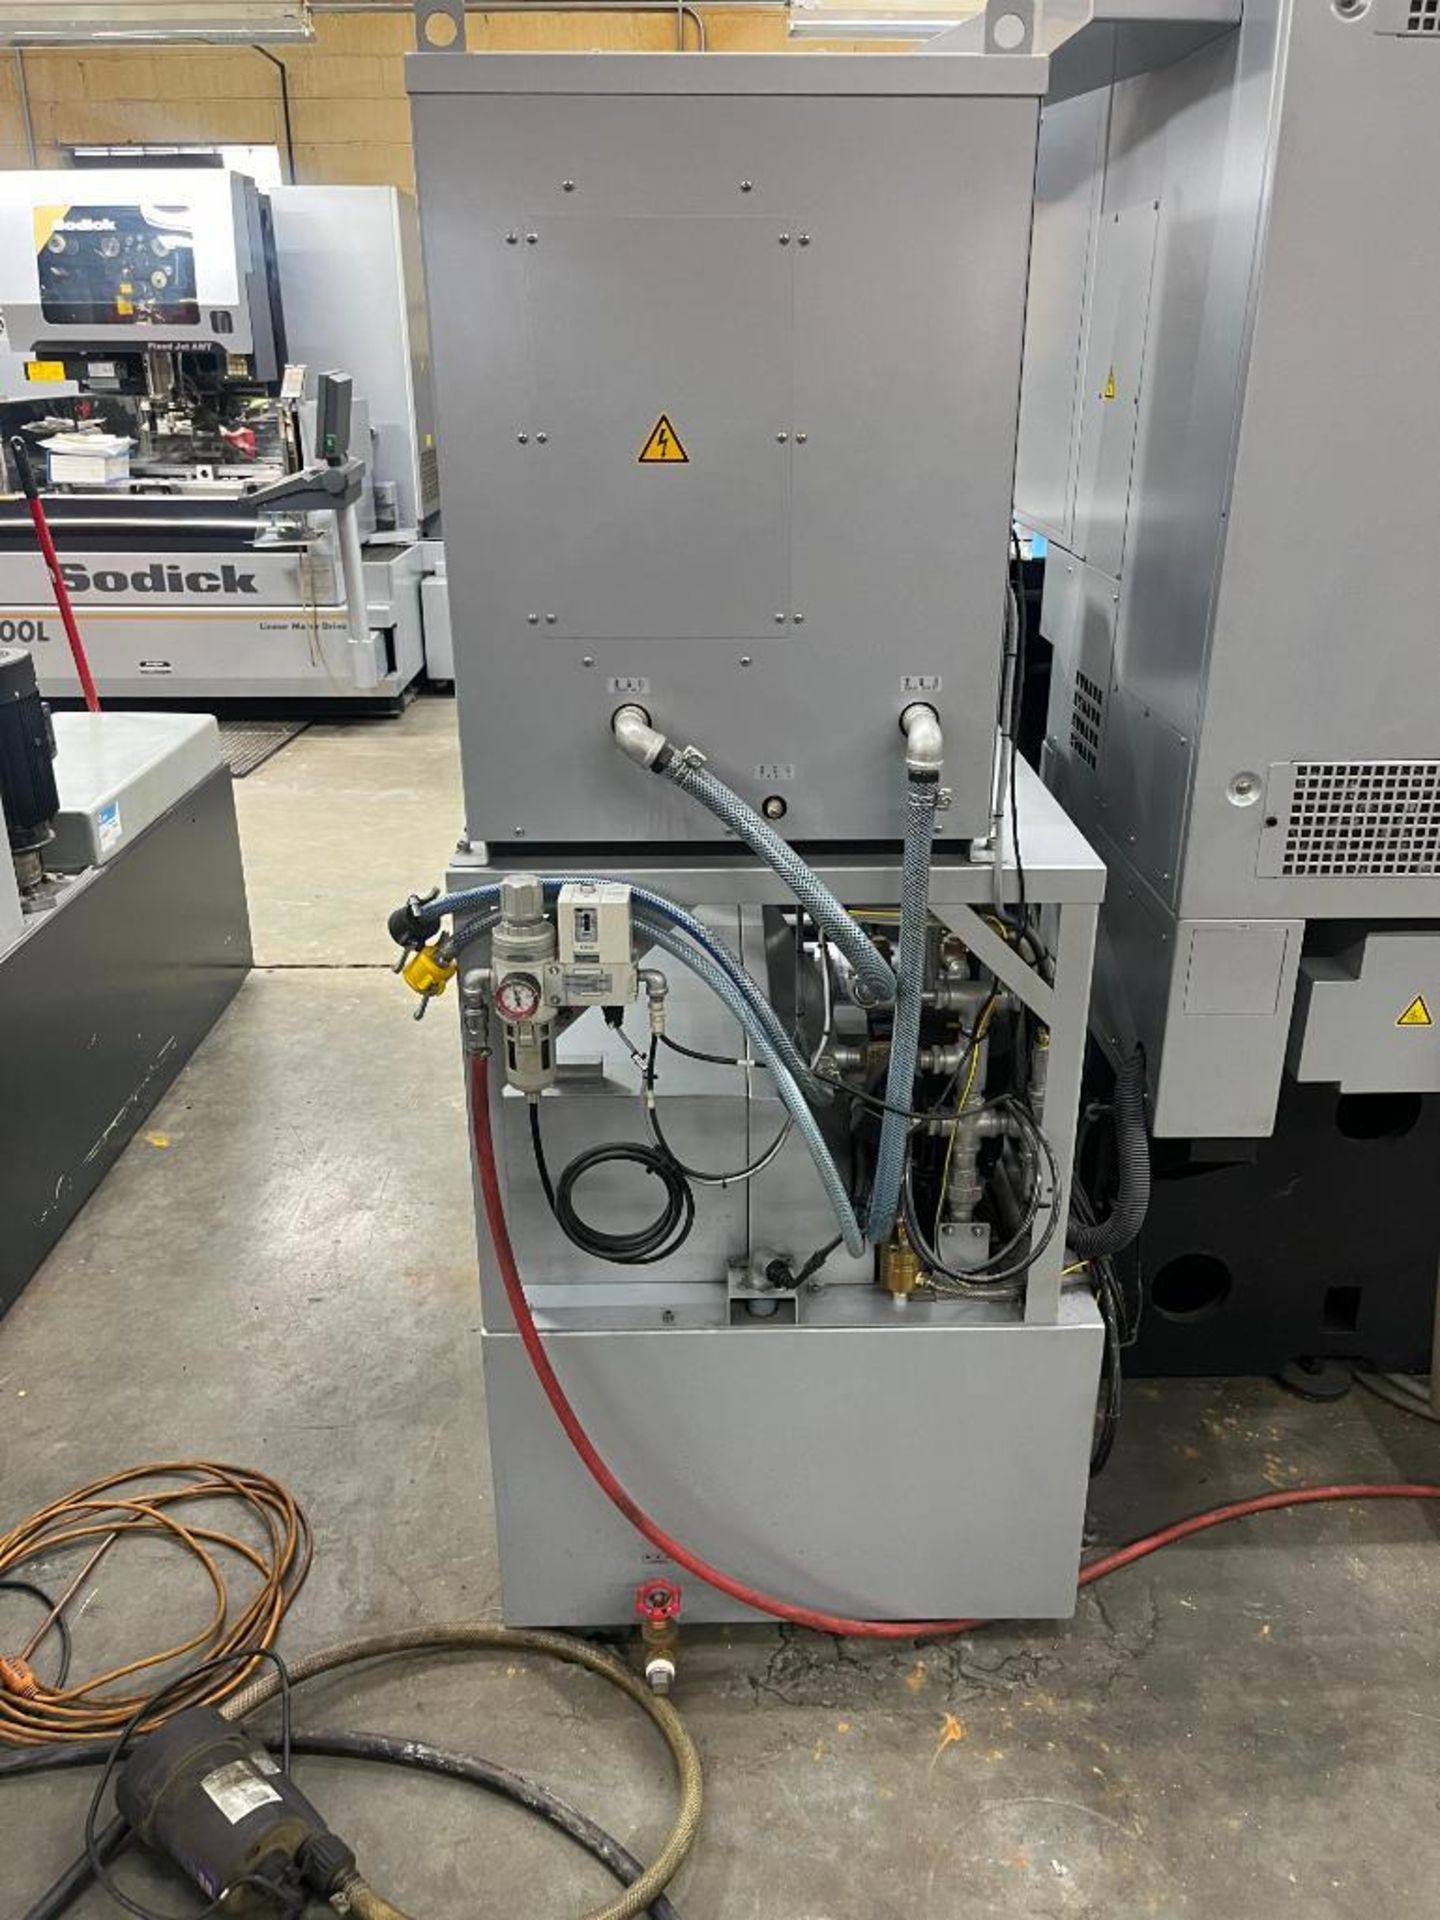 Sodick CNC Wire-Cut EDM Machine, Model VL400Q, S/N T0638 (2019) with Sodick LN2W CNC Control. With 8 - Image 28 of 41